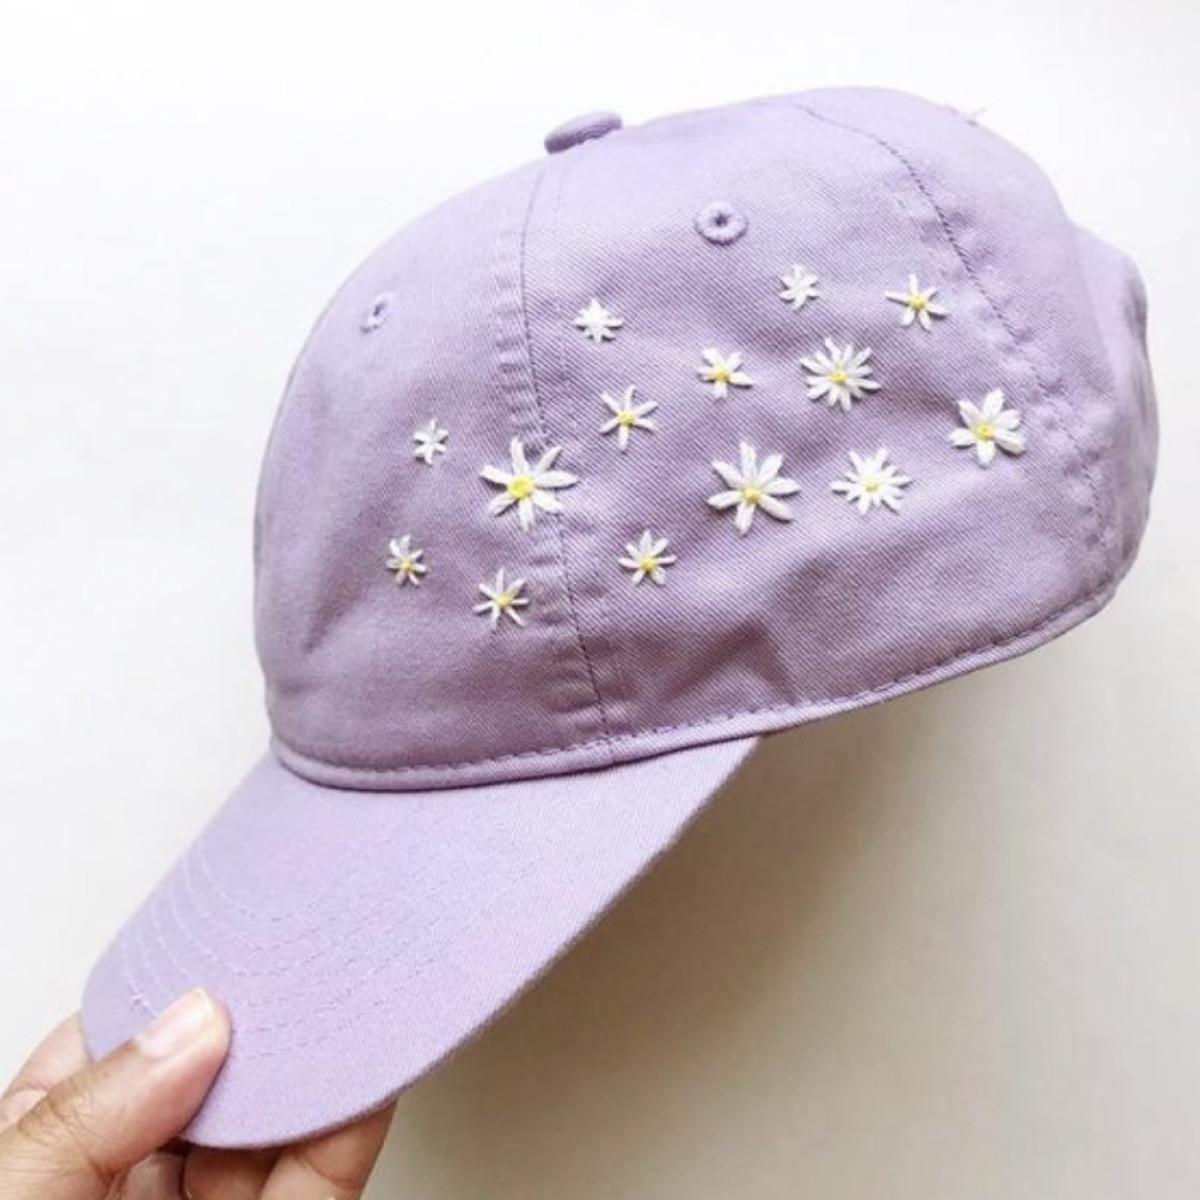 Fun hat embroidery patterns